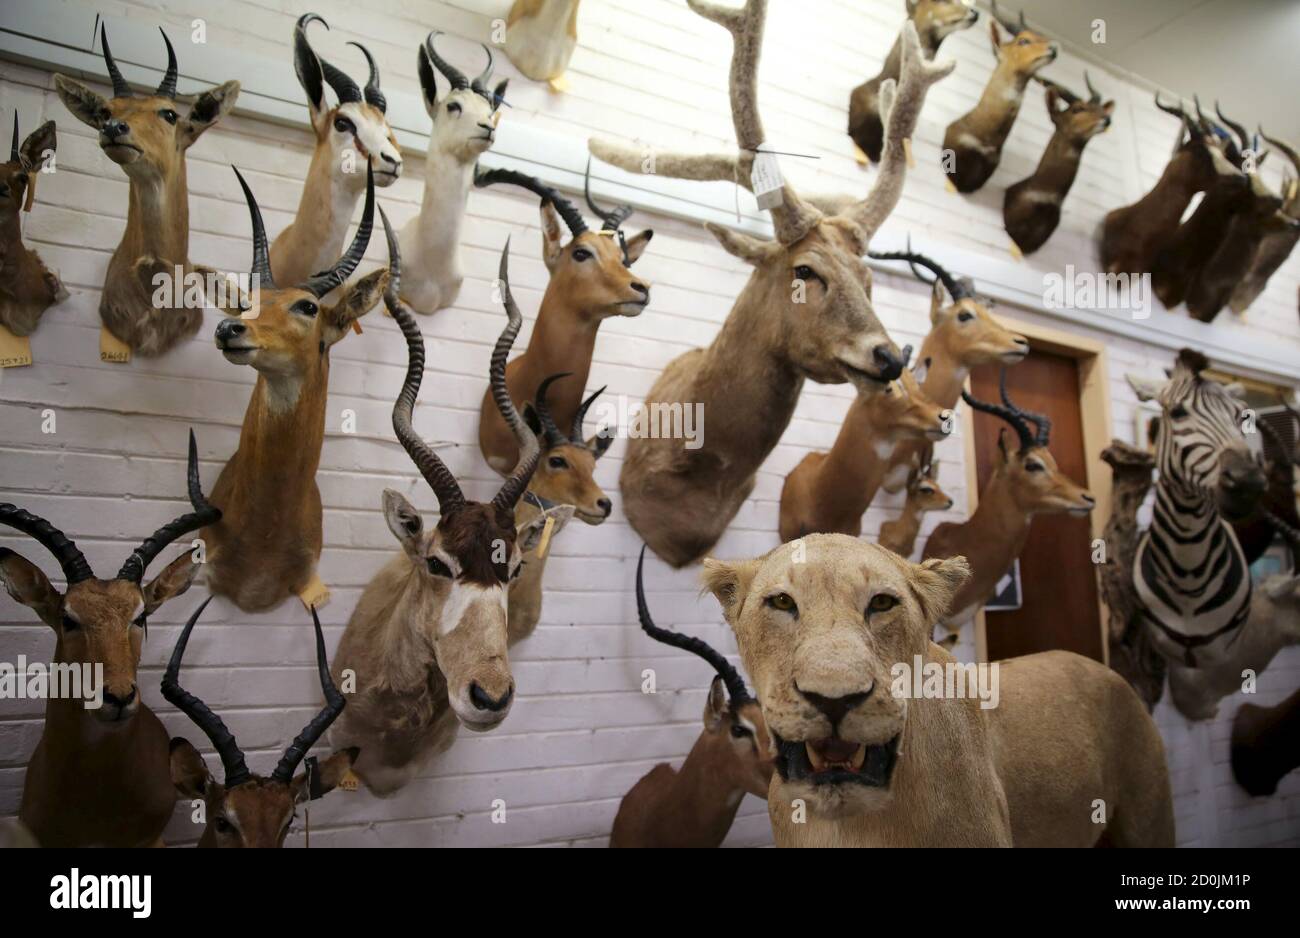 Animal trophies are seen at the entrance of a taxidermy studio in Pretoria,  February 12, 2015. Africa's big game hunting industry helps protect endangered  species, according to its advocates. Opponents say it